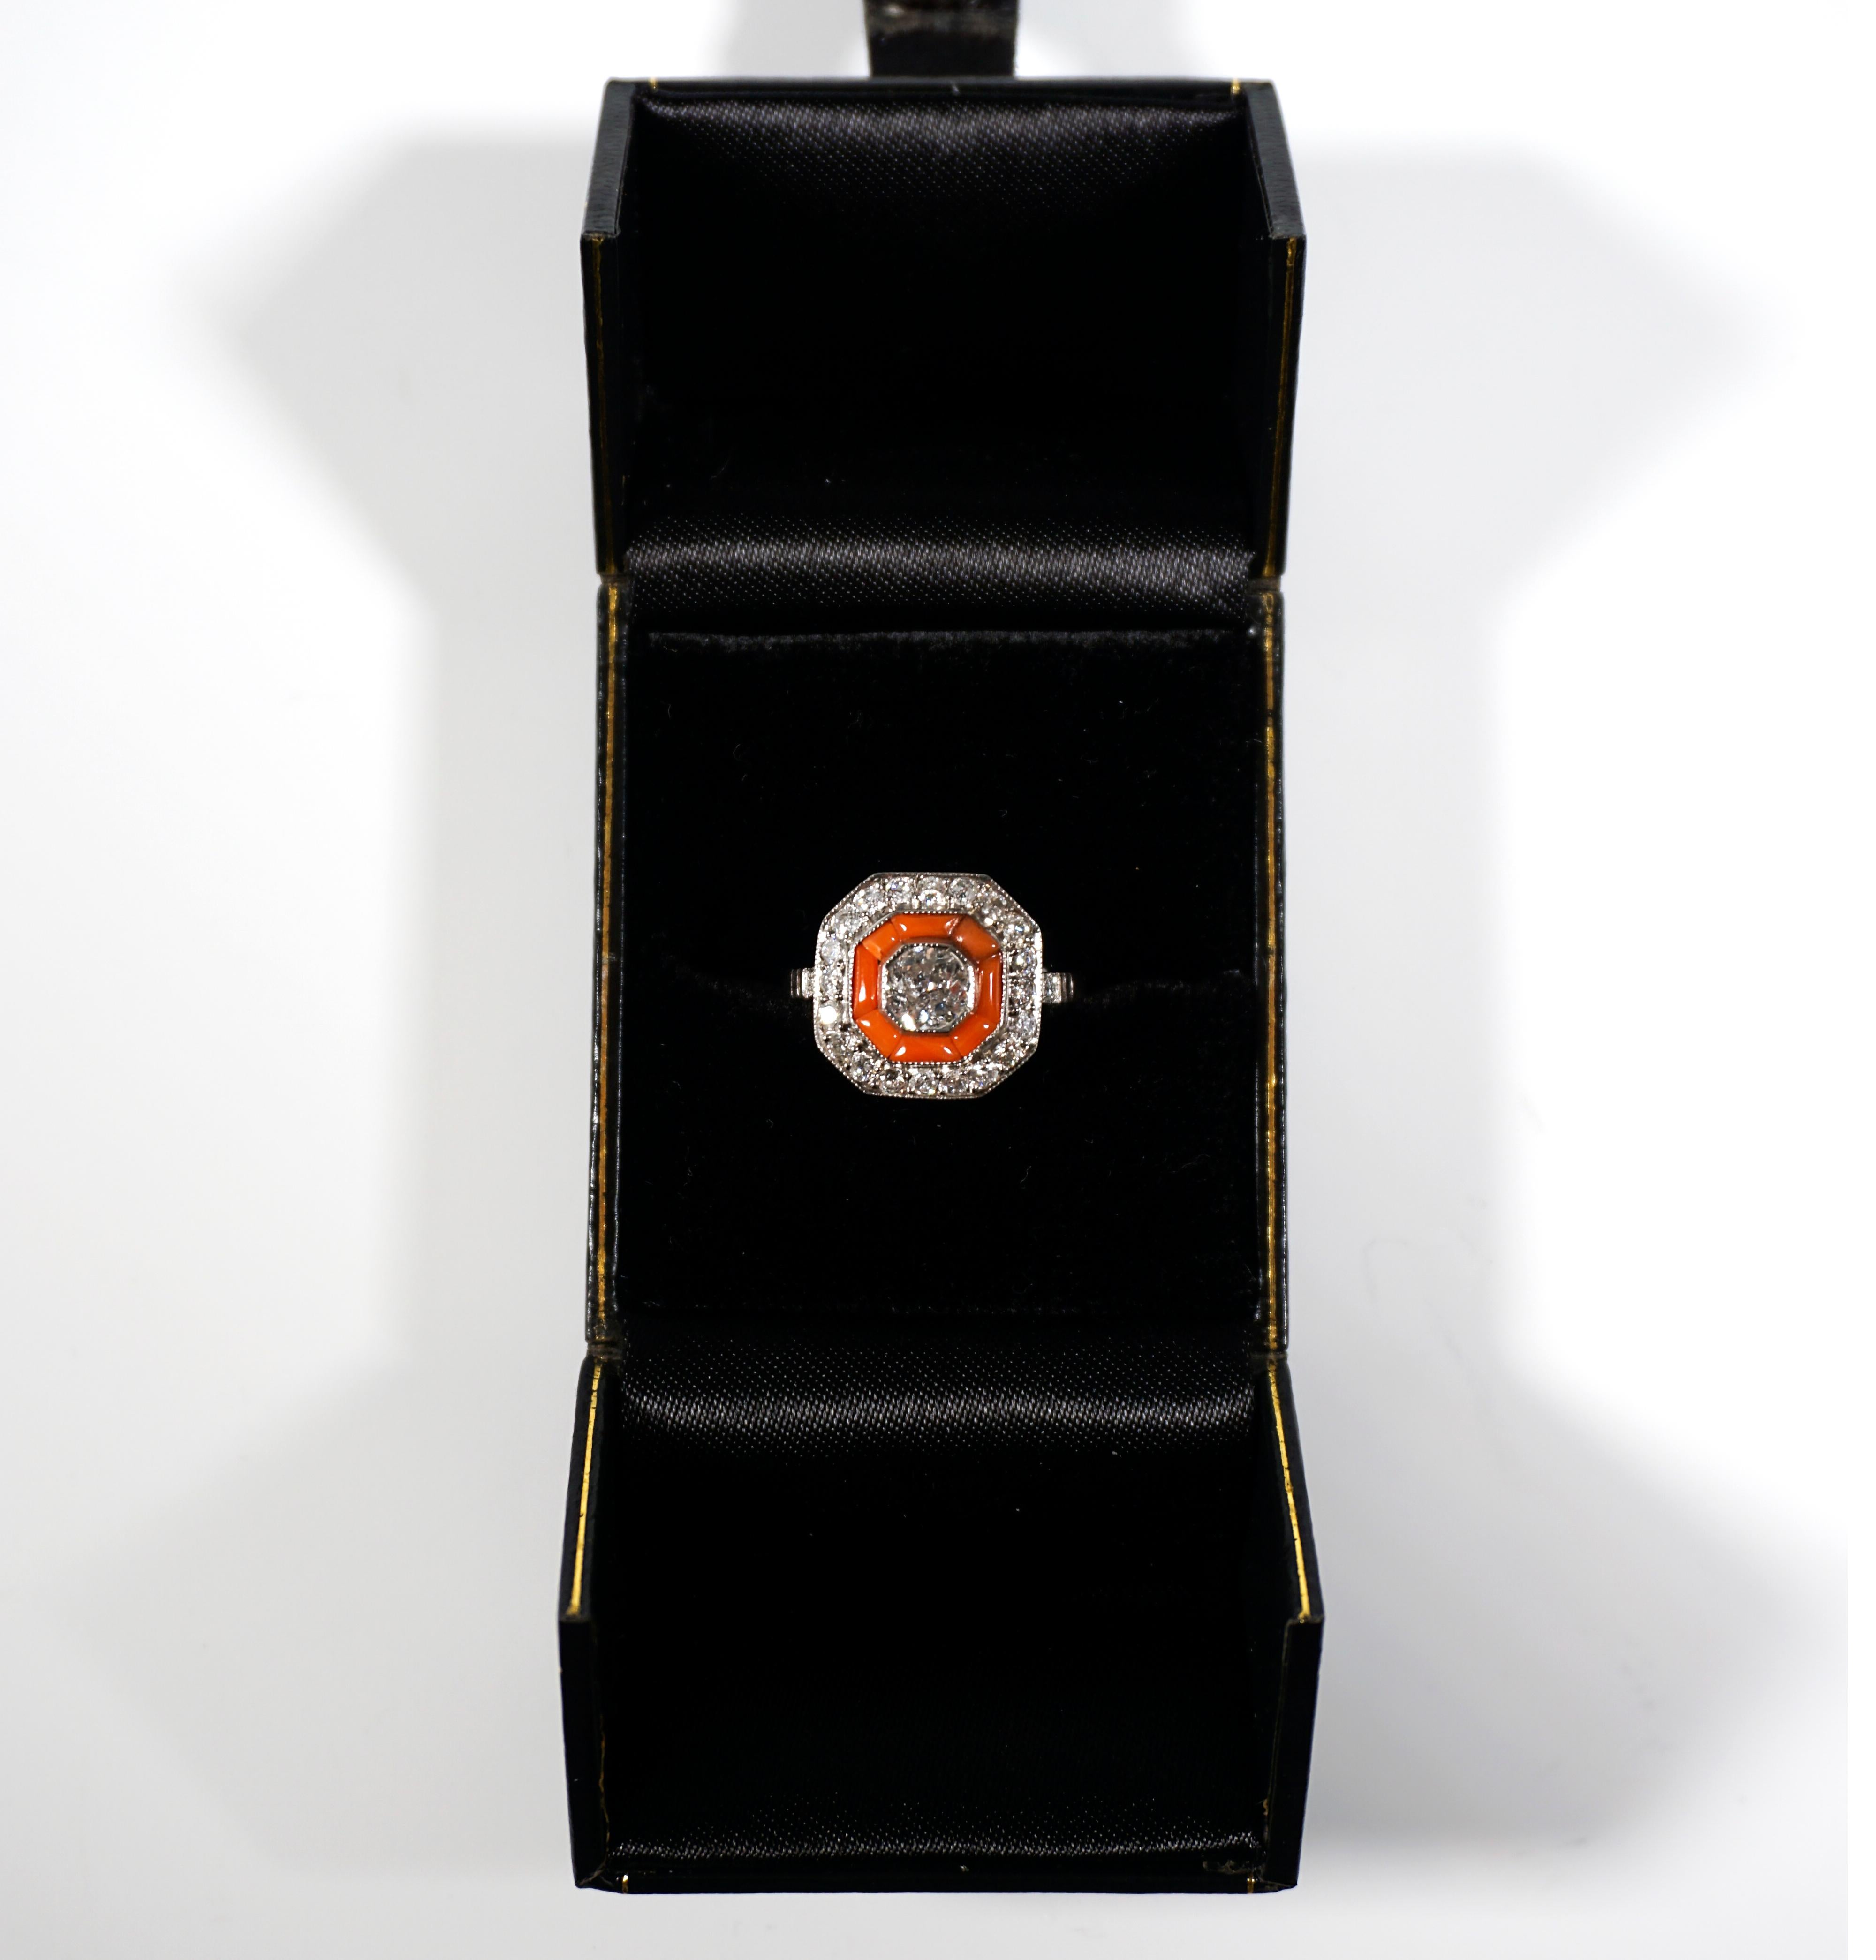 Delicate antique diamond ring in octagonal shape with a central diamond in old brilliant cut, estimated 0.40 ct, surrounded by a wreath of coral pieces, which in turn is surrounded by a halo of 20 smaller brilliant-cut diamonds, together approx.